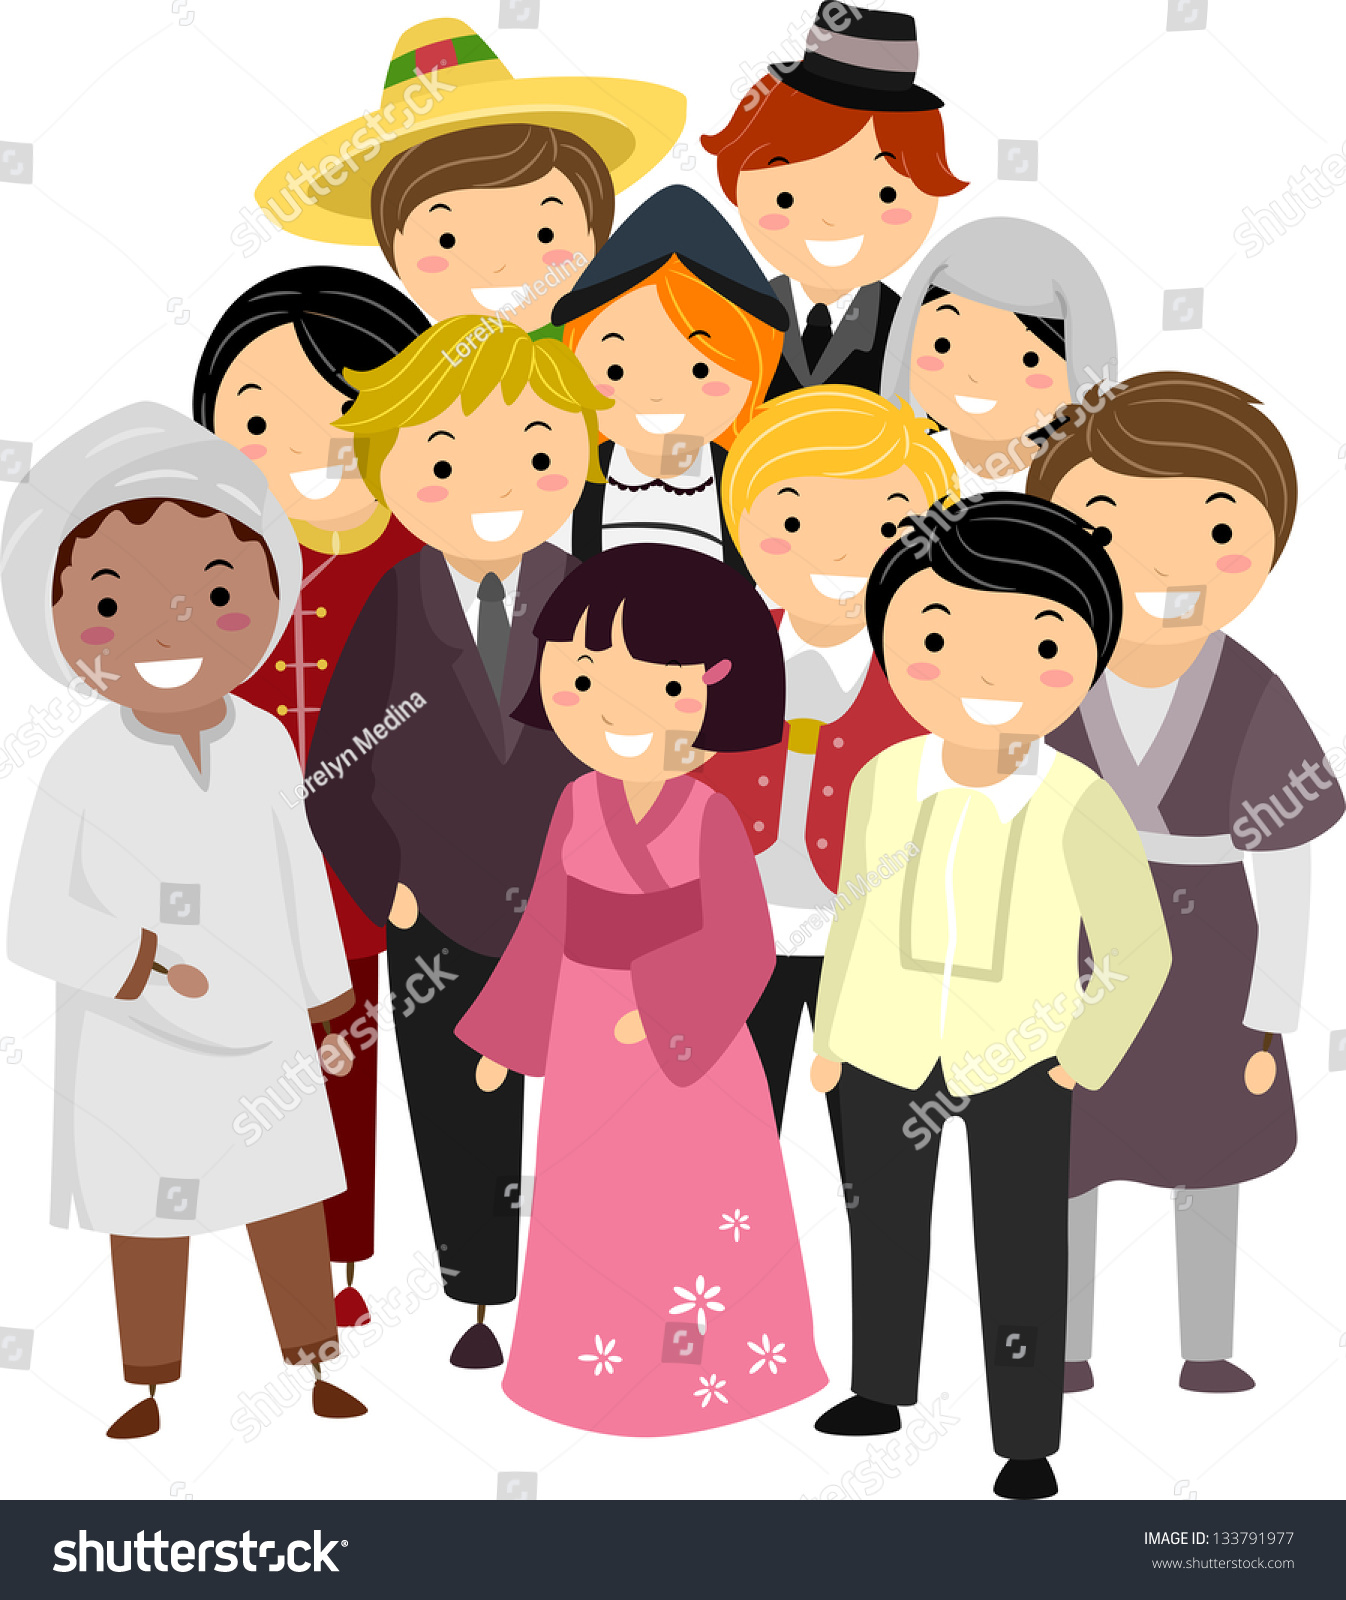 http://image.shutterstock.com/z/stock-vector-illustration-of-people-with-different-nationalities-wearing-their-national-costumes-133791977.jpg